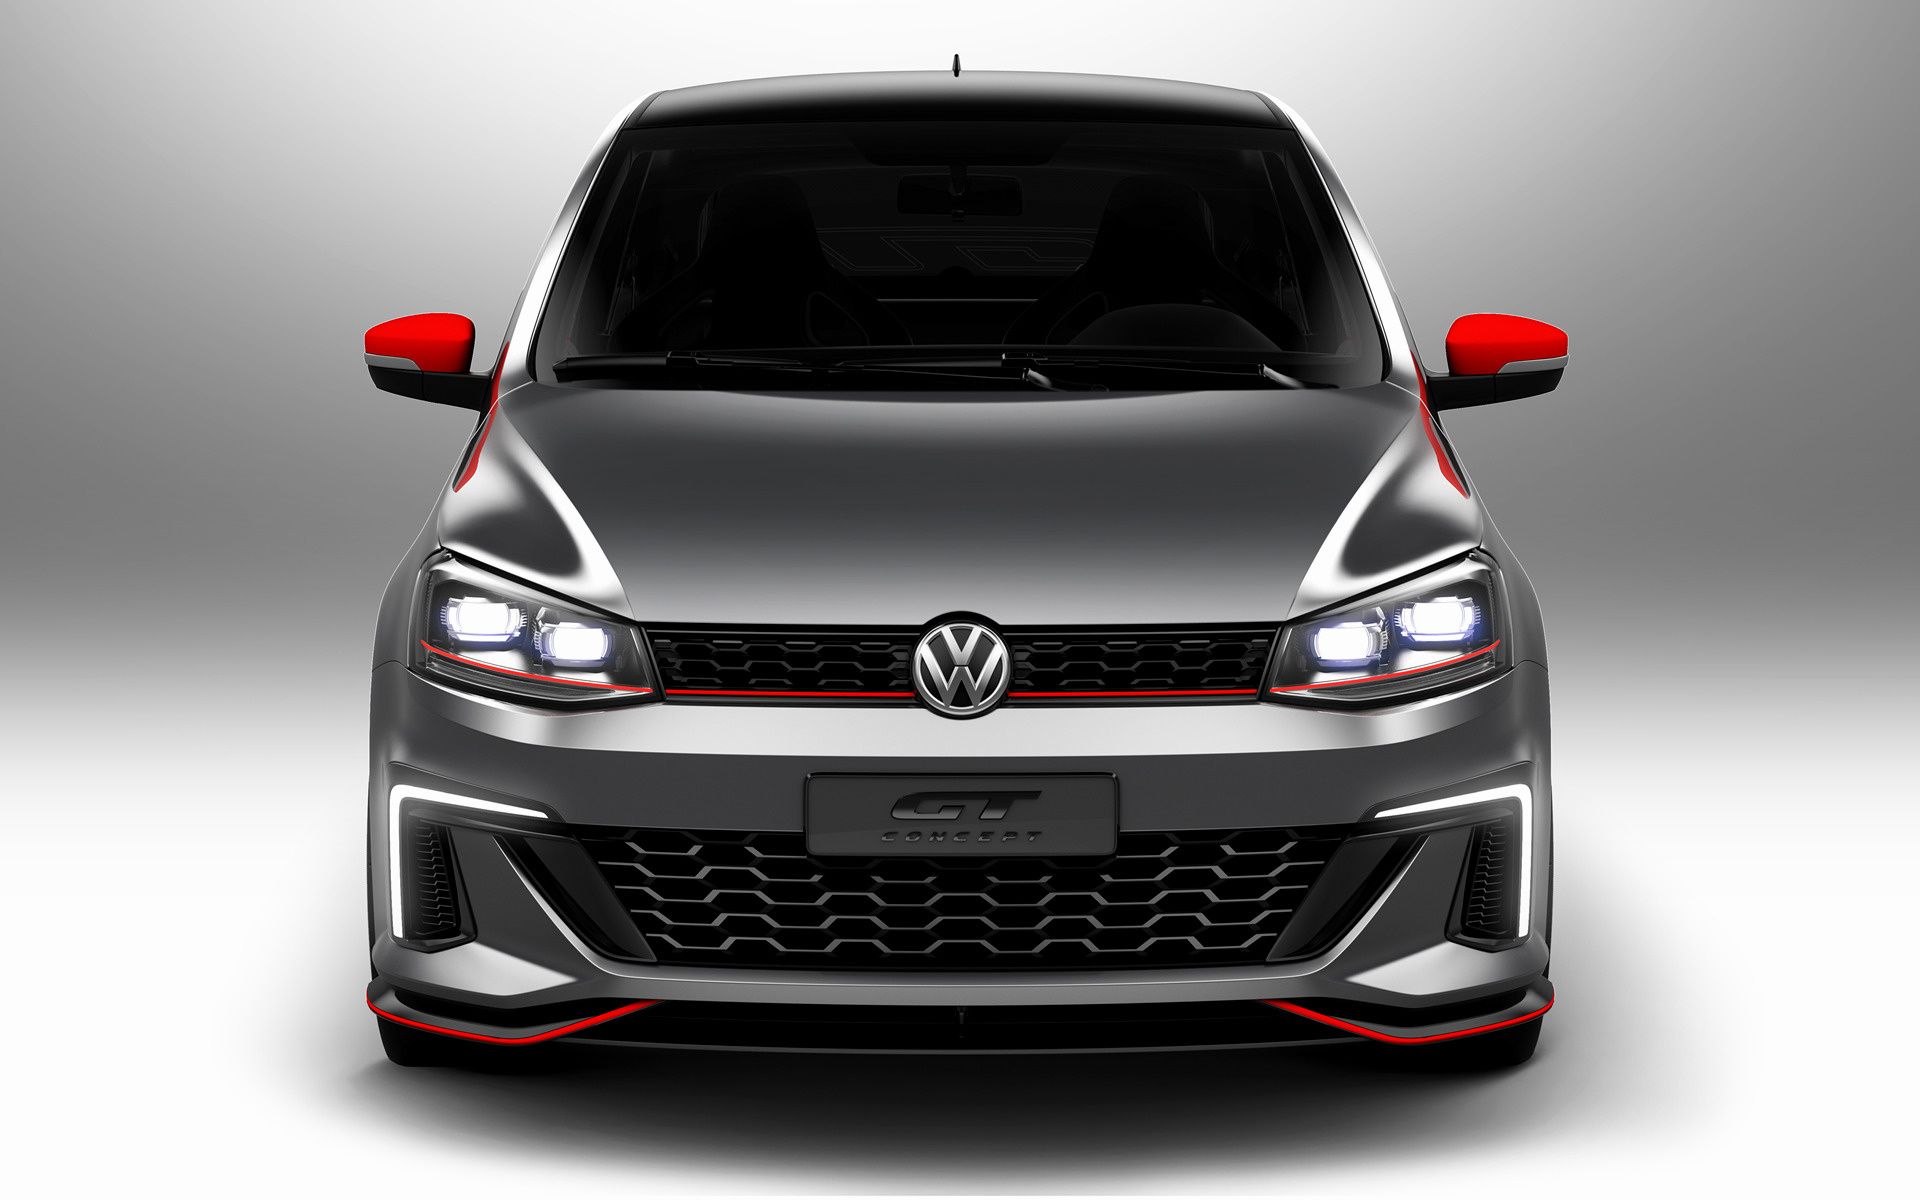 Volkswagen Gol GT Concept and HD Image